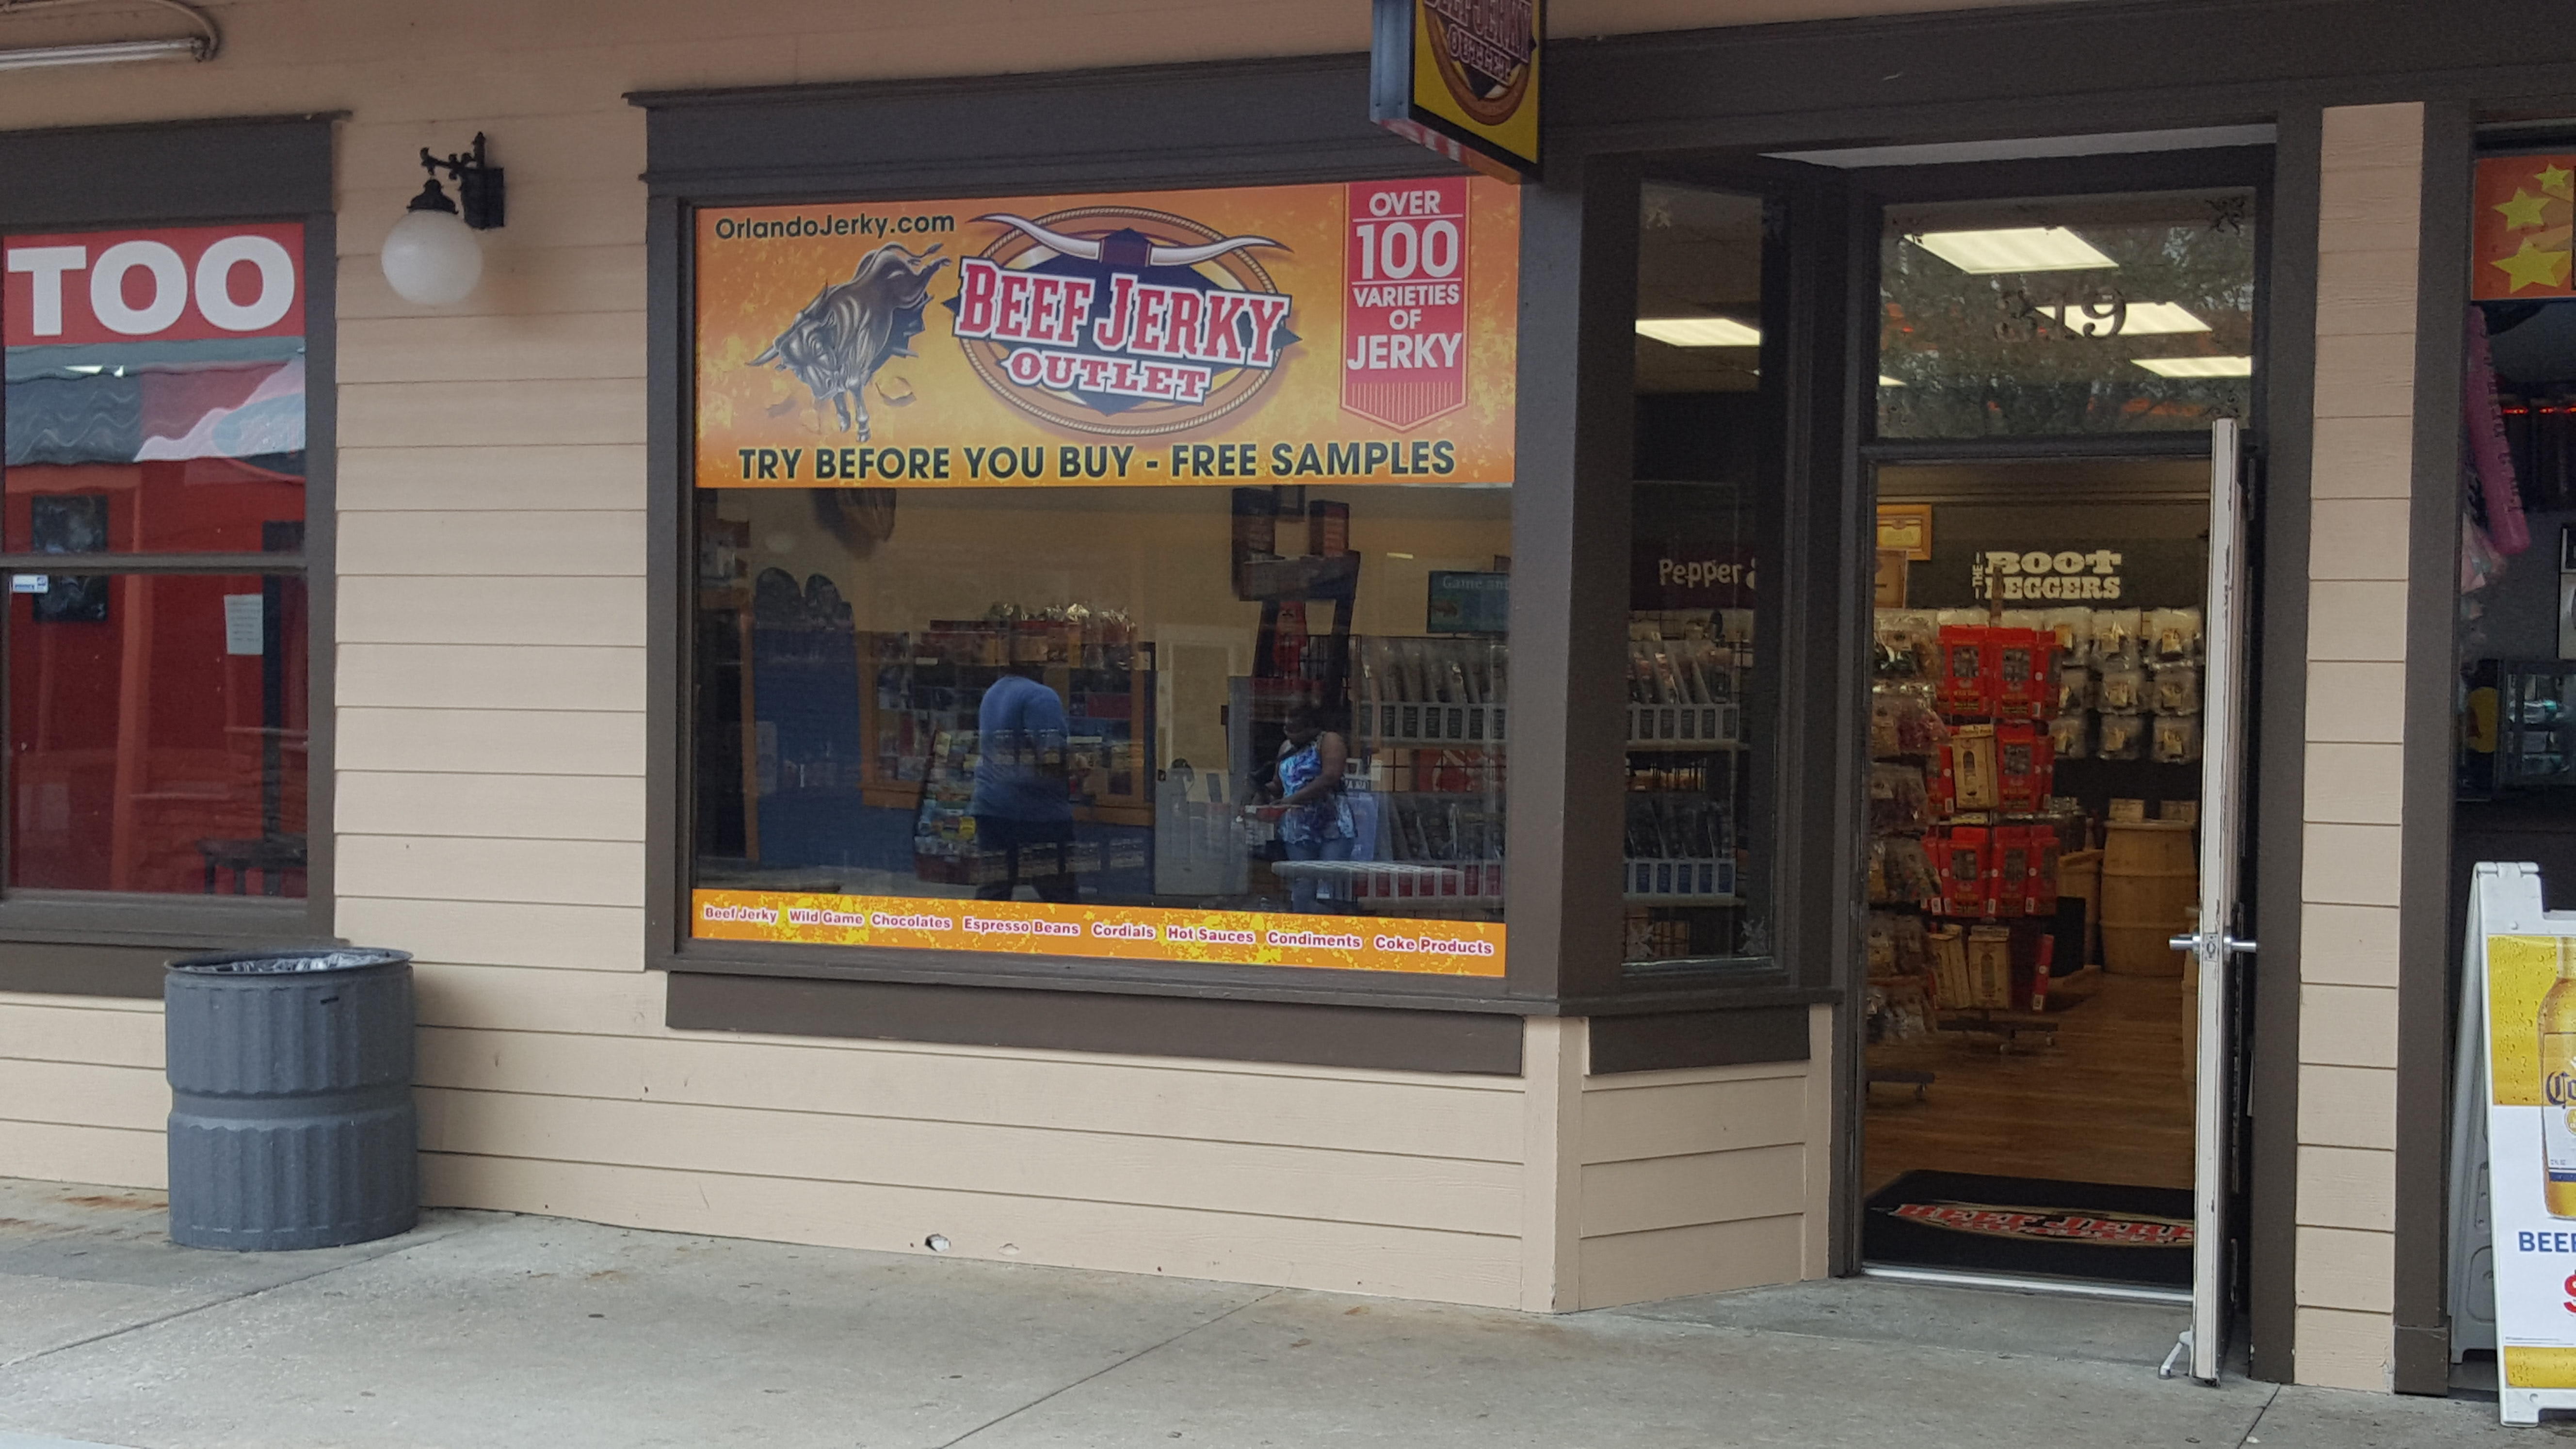 Beef Jerky Outlet Photo